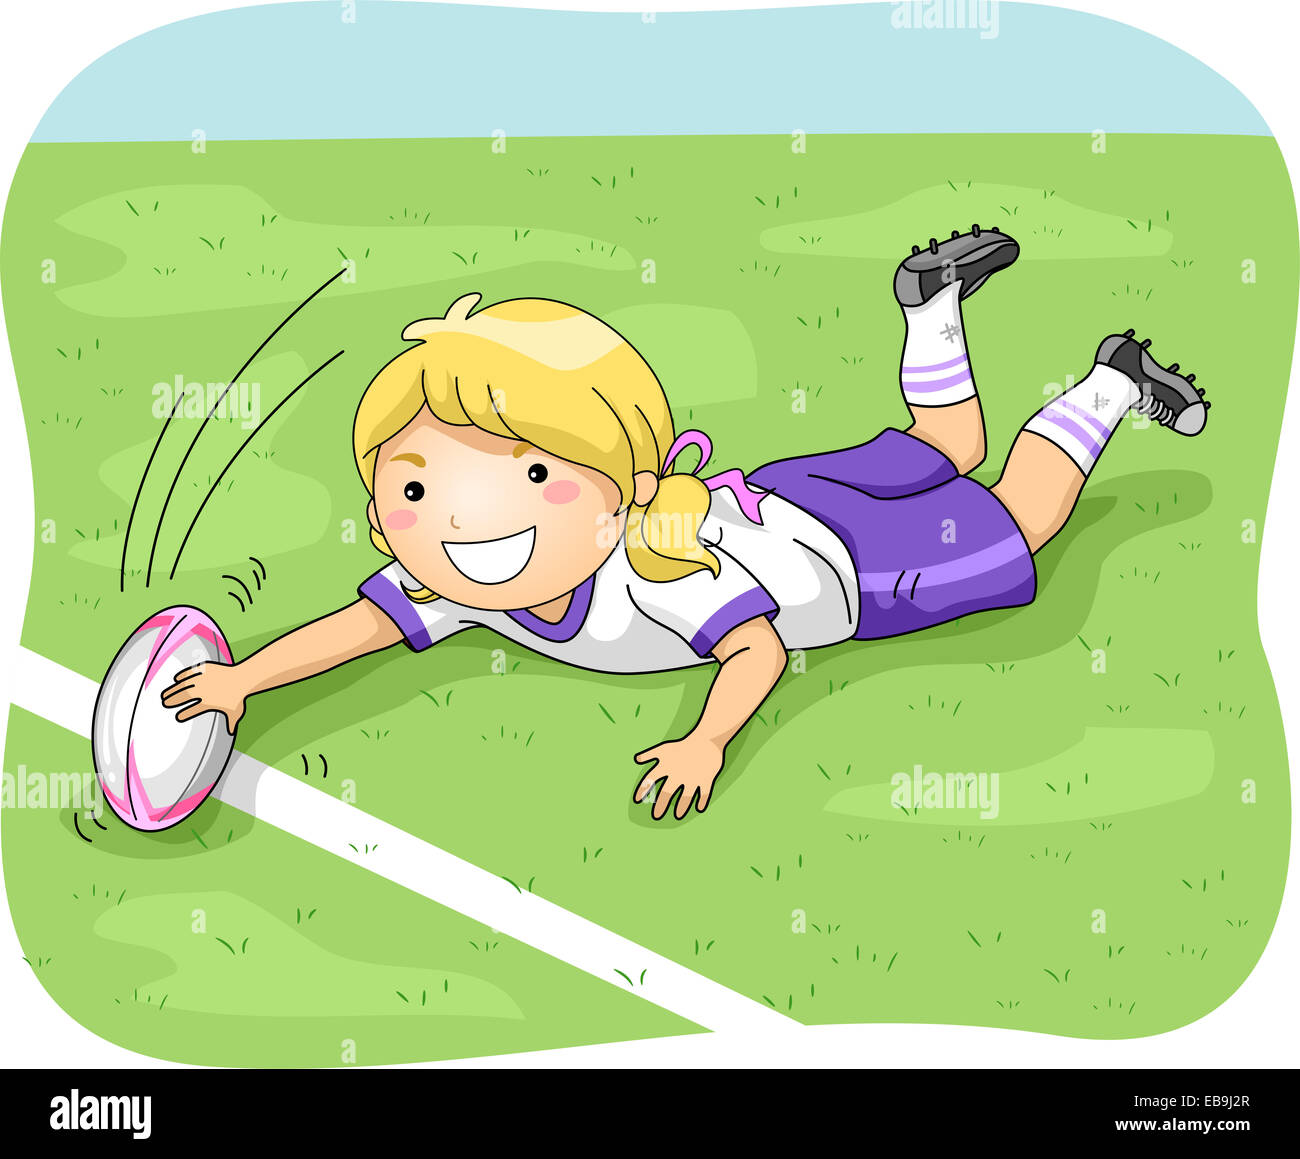 Illustration of a Female Rugby Player Scoring a Goal Stock Photo